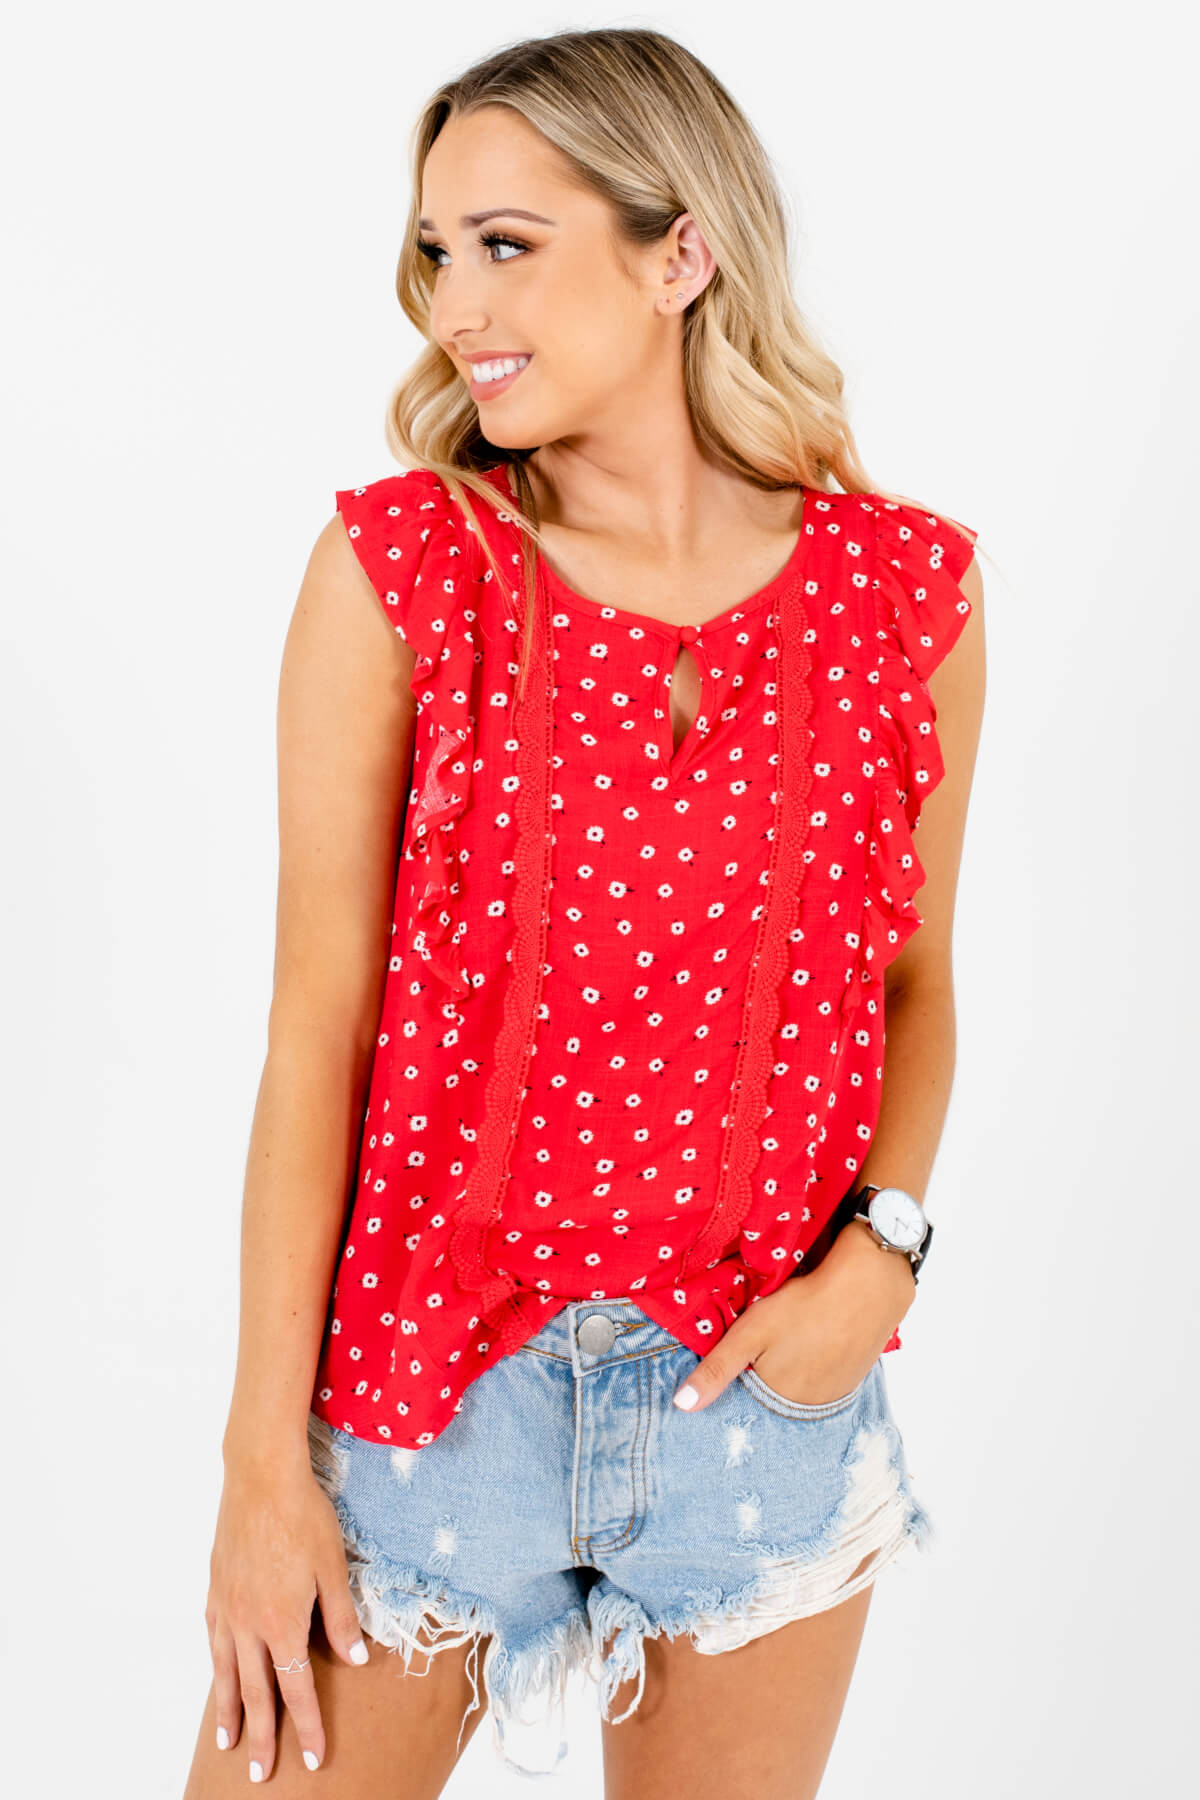 Red Daisy Floral Patterned Boutique Tops for Women